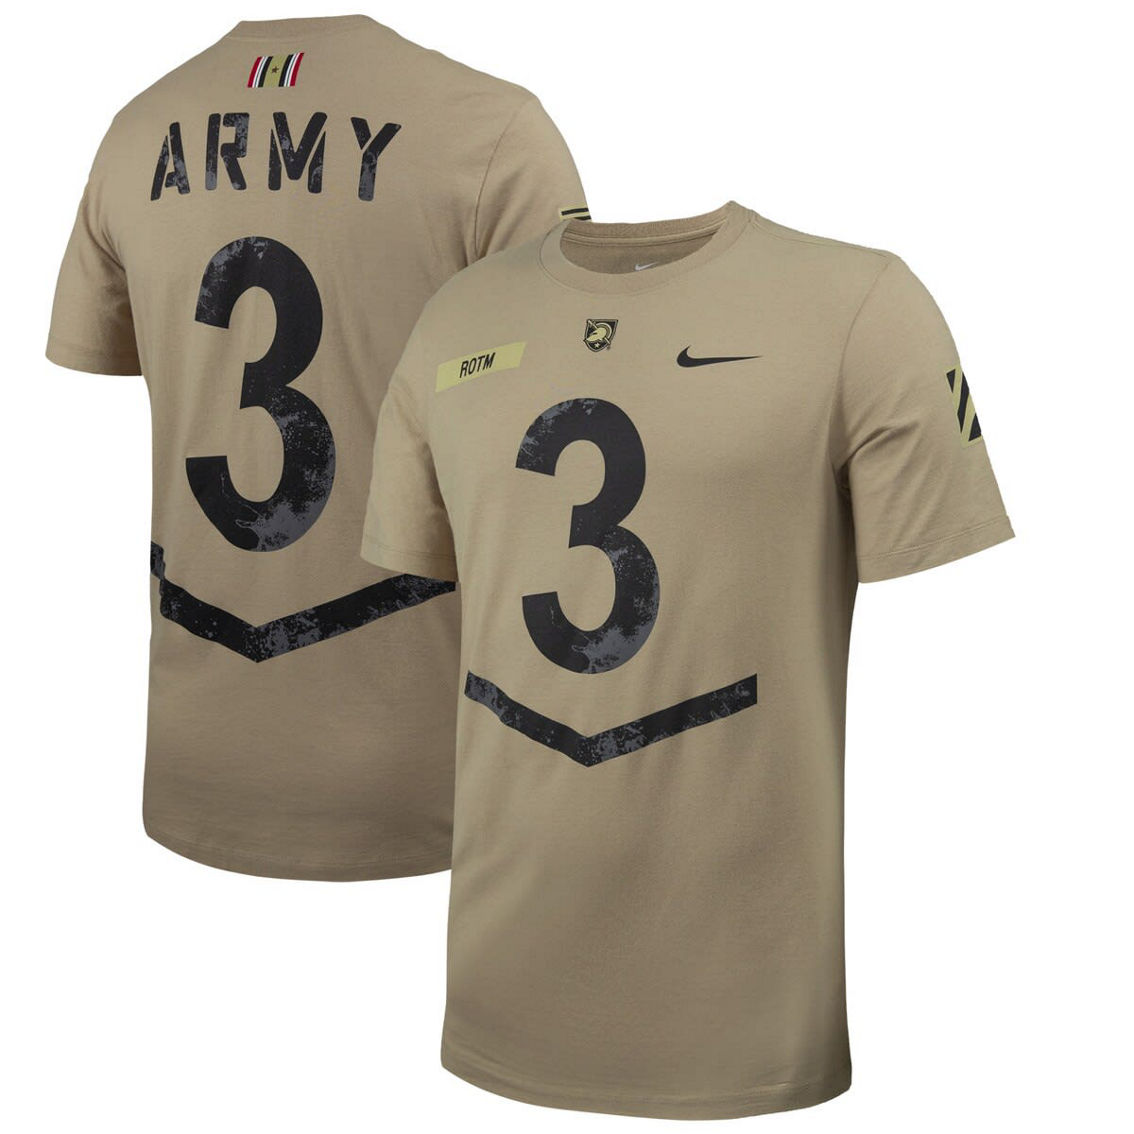 Nike Men's Tan Army Black Knights 2023 Rivalry Collection Jersey T-Shirt - Image 2 of 4